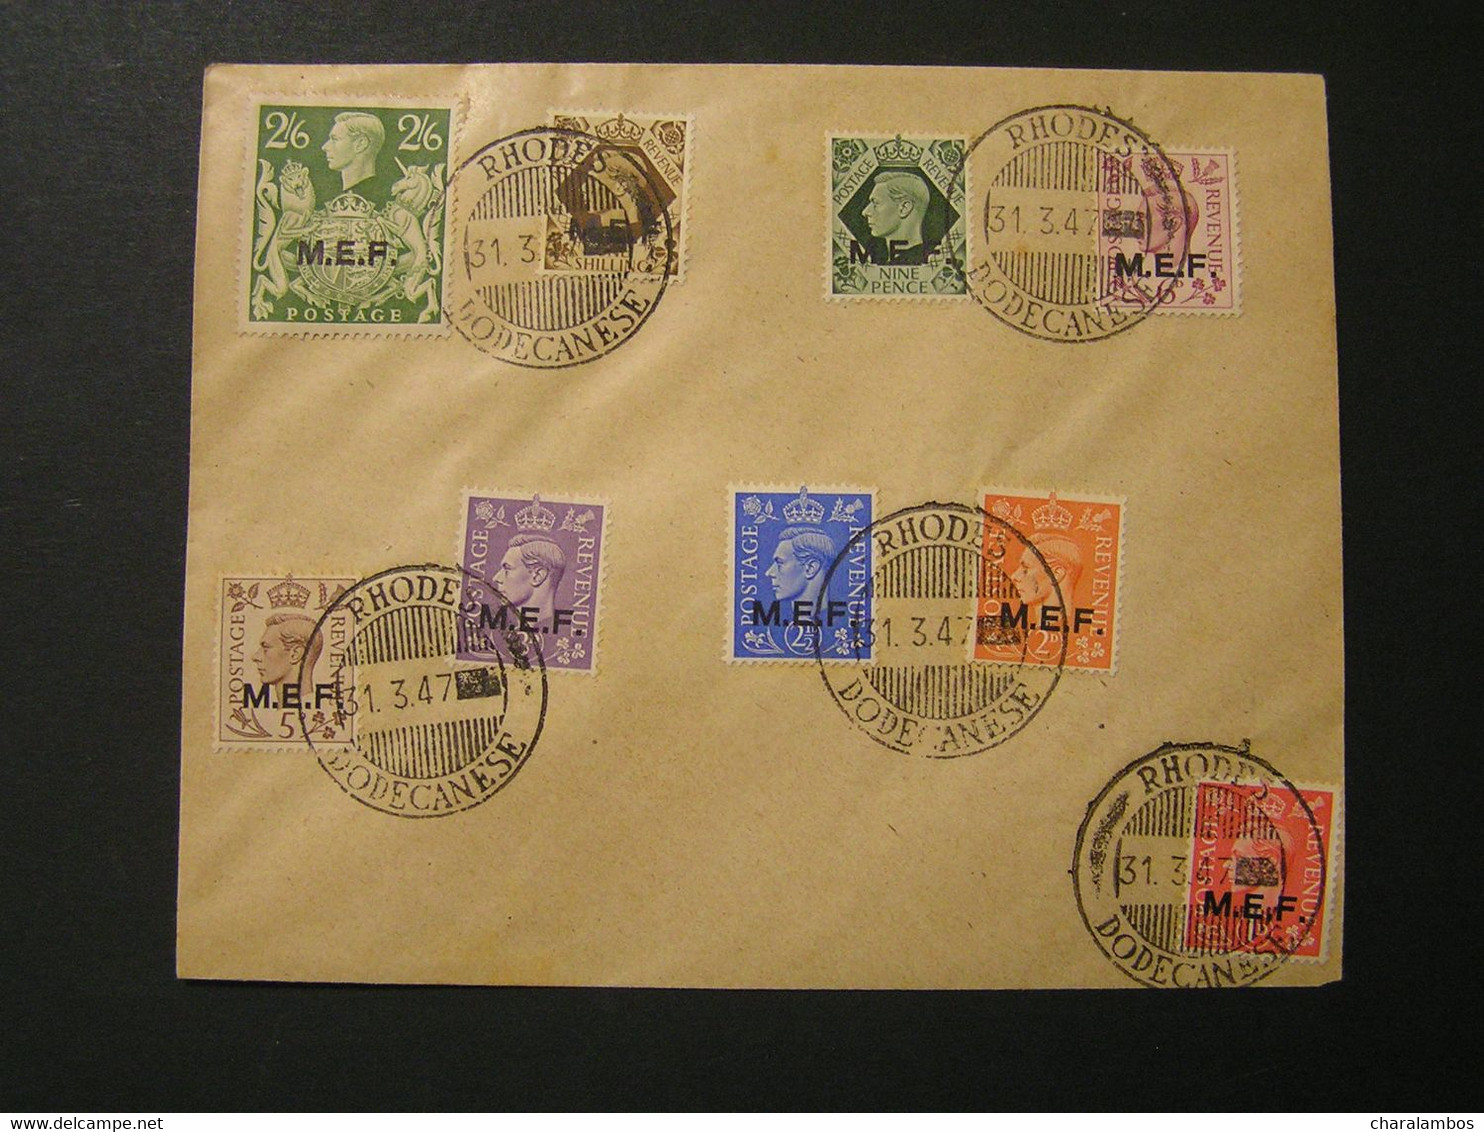 GREECE 1945 BRITISH MILITARY ADMINISTRATION ISSE M.E.F. Overprints Definitive Cover 31-3-47.. - Dodekanisos